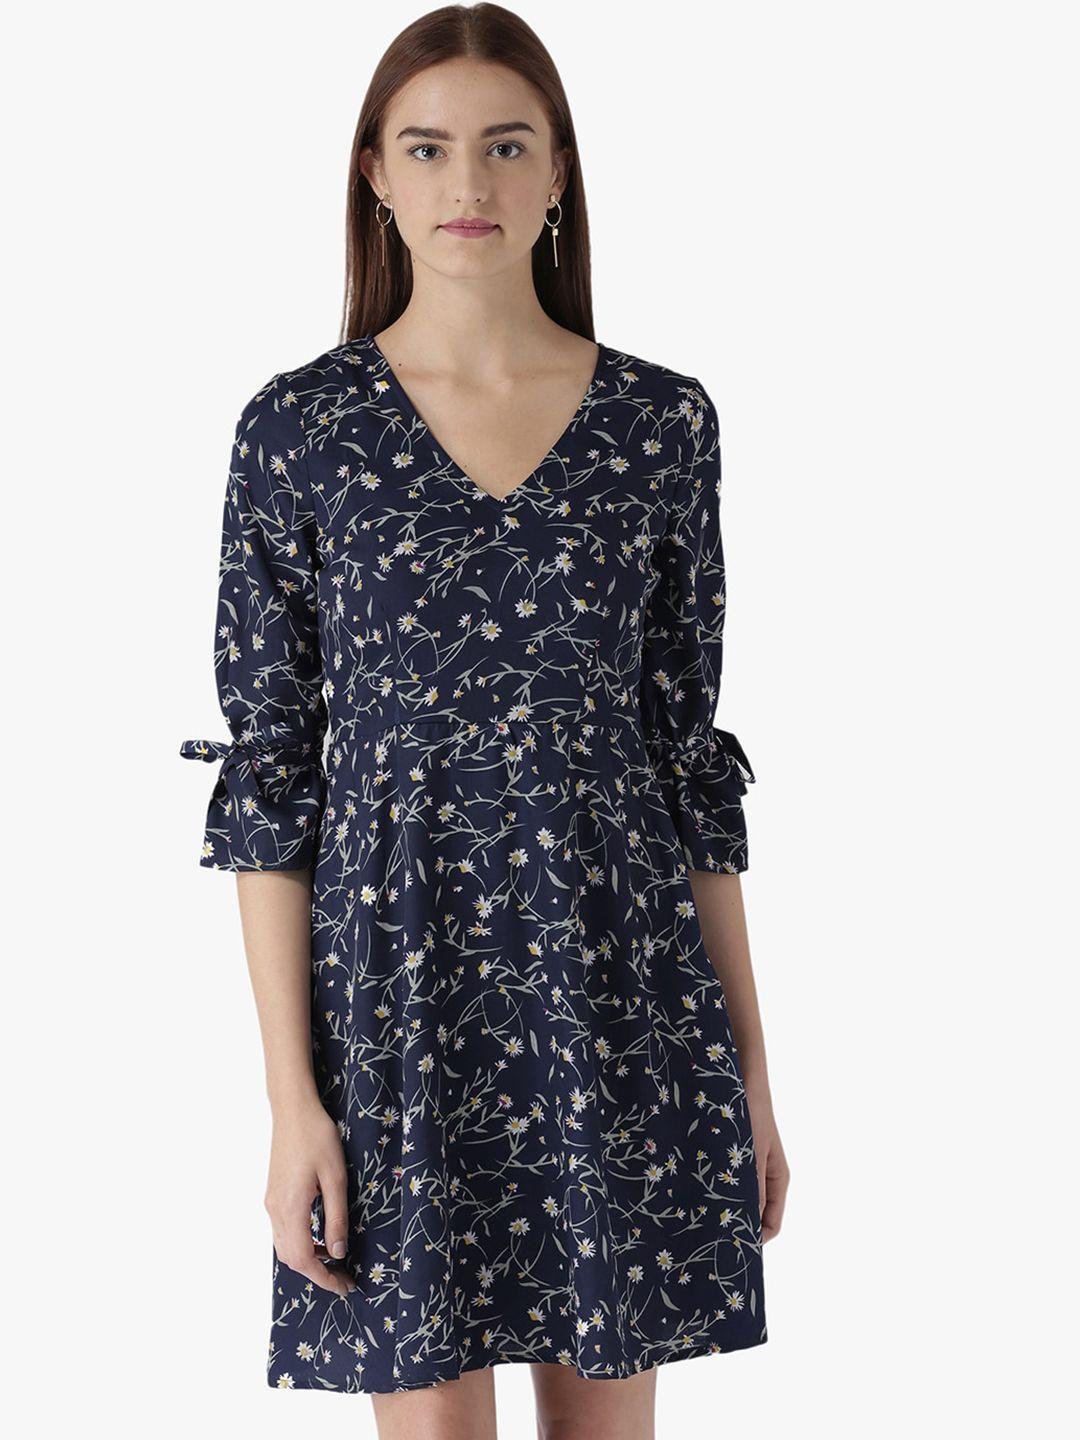 dodo & moa navy blue floral print bell sleeve crepe fit & flare dress